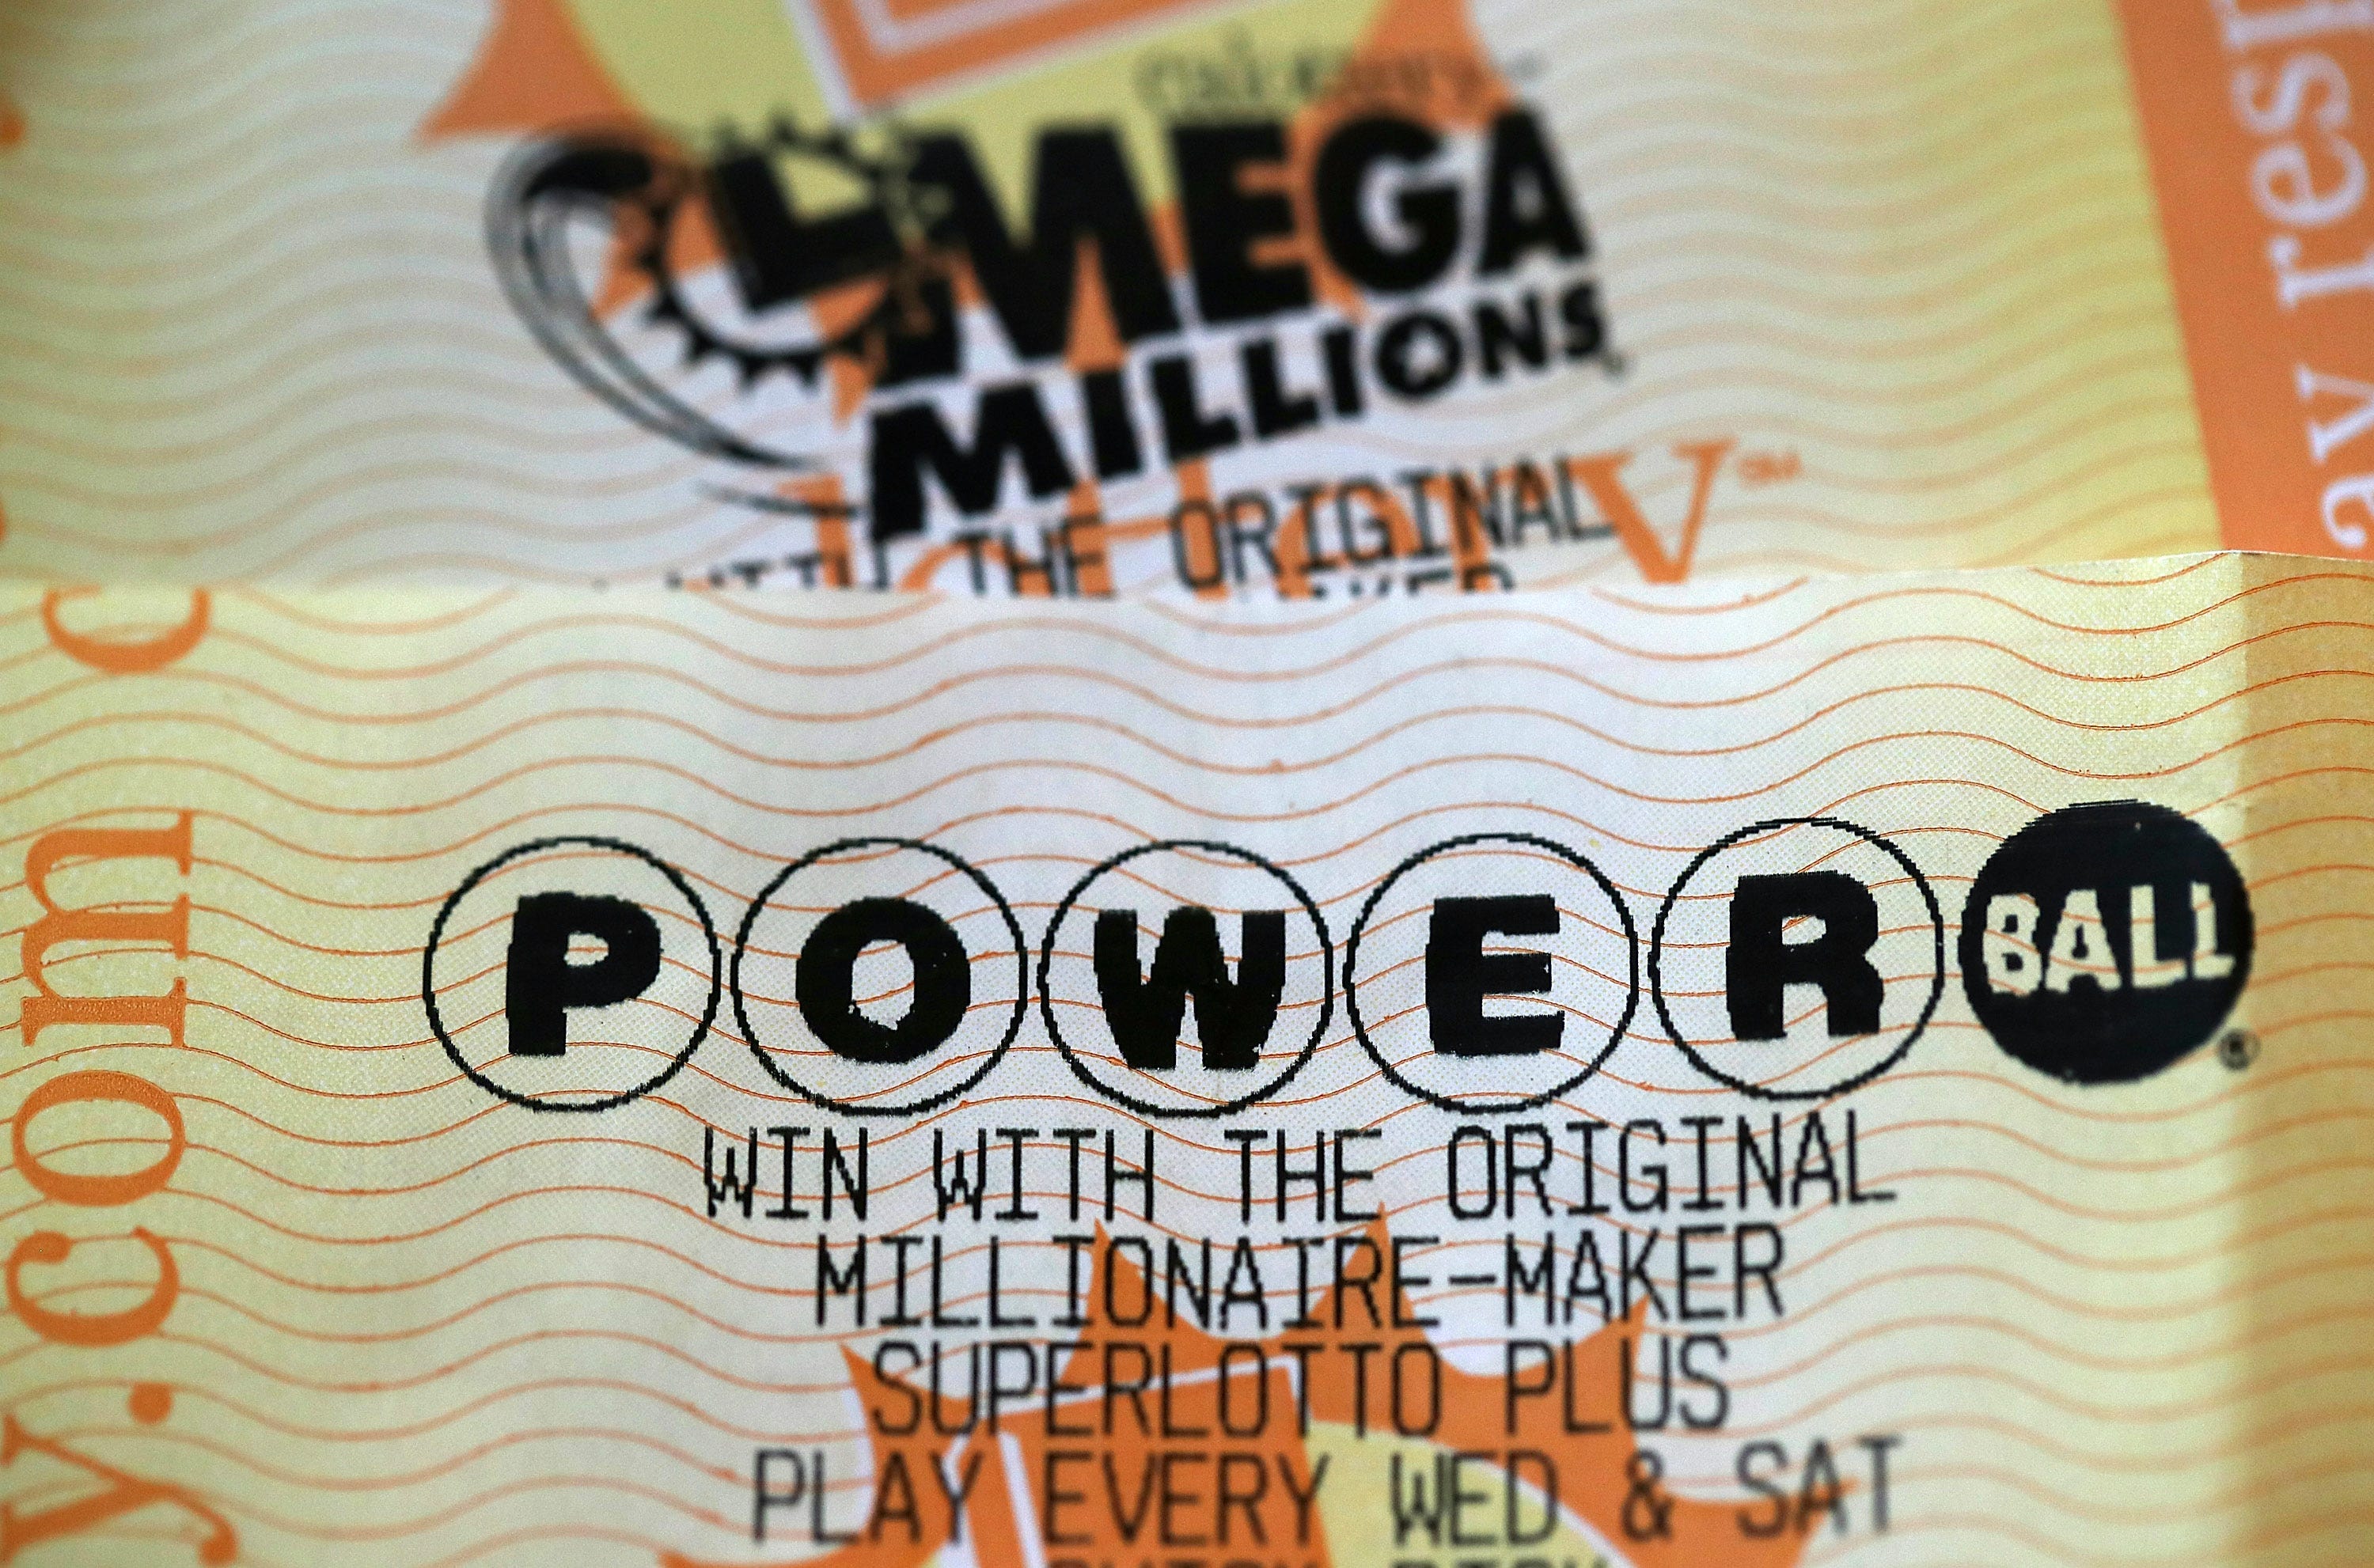 powerball drawing today